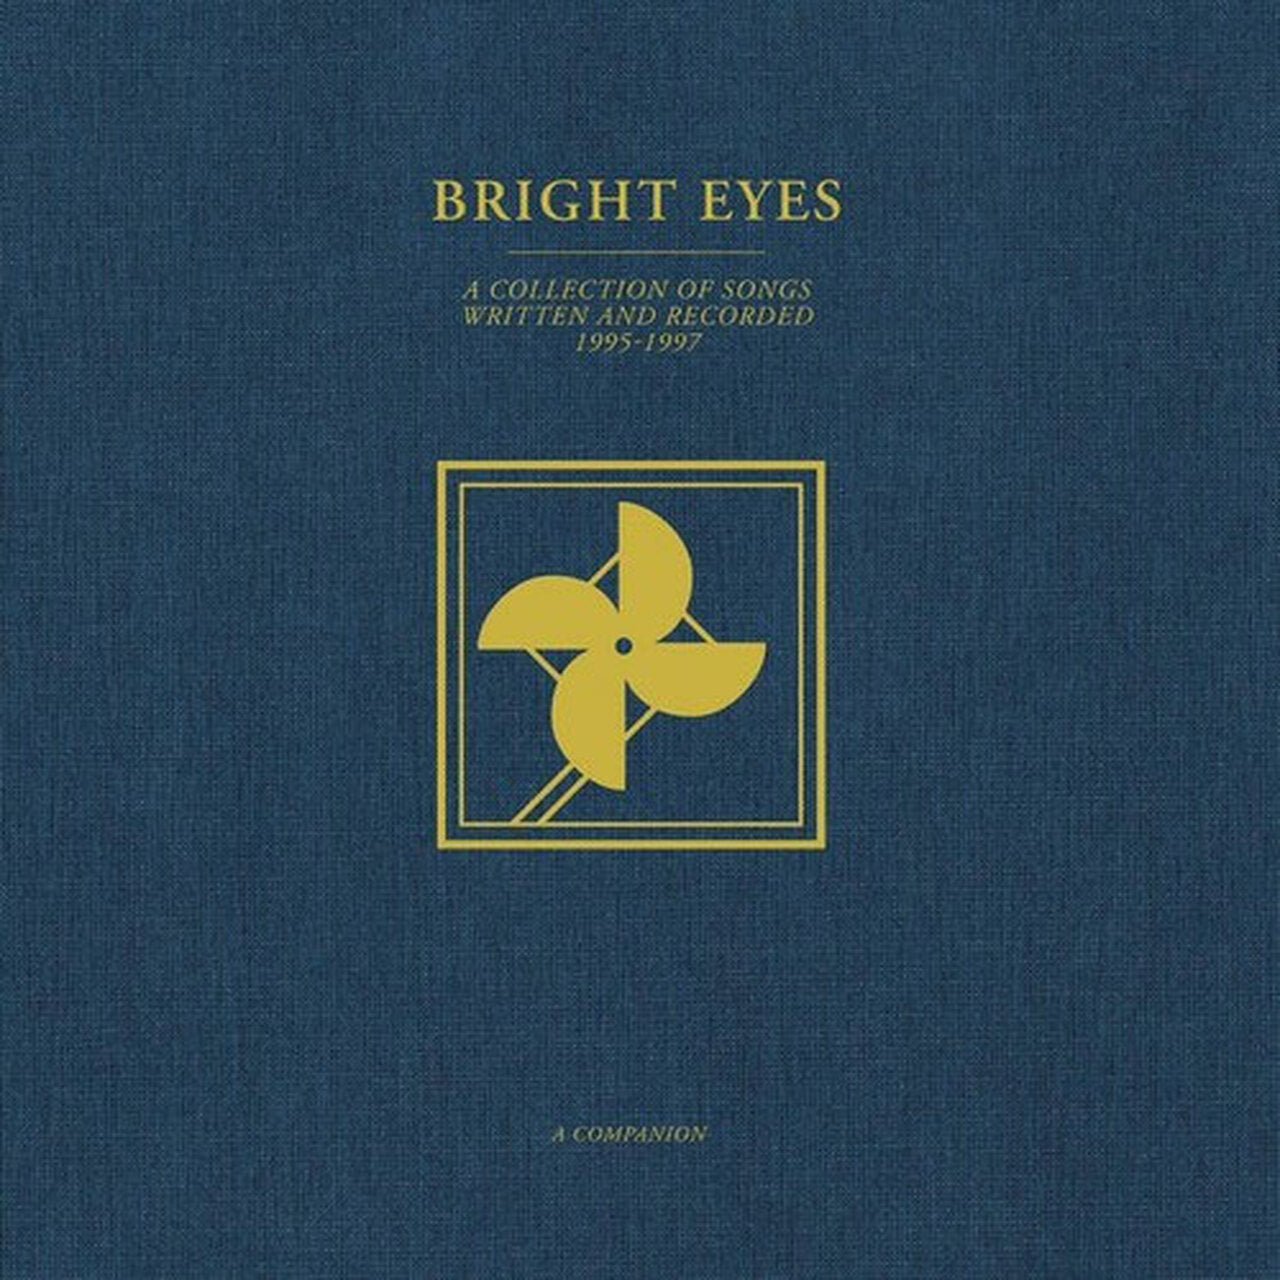 Bright Eyes //  A Collection of Songs Written and Recorded 1995-1997: A Companion